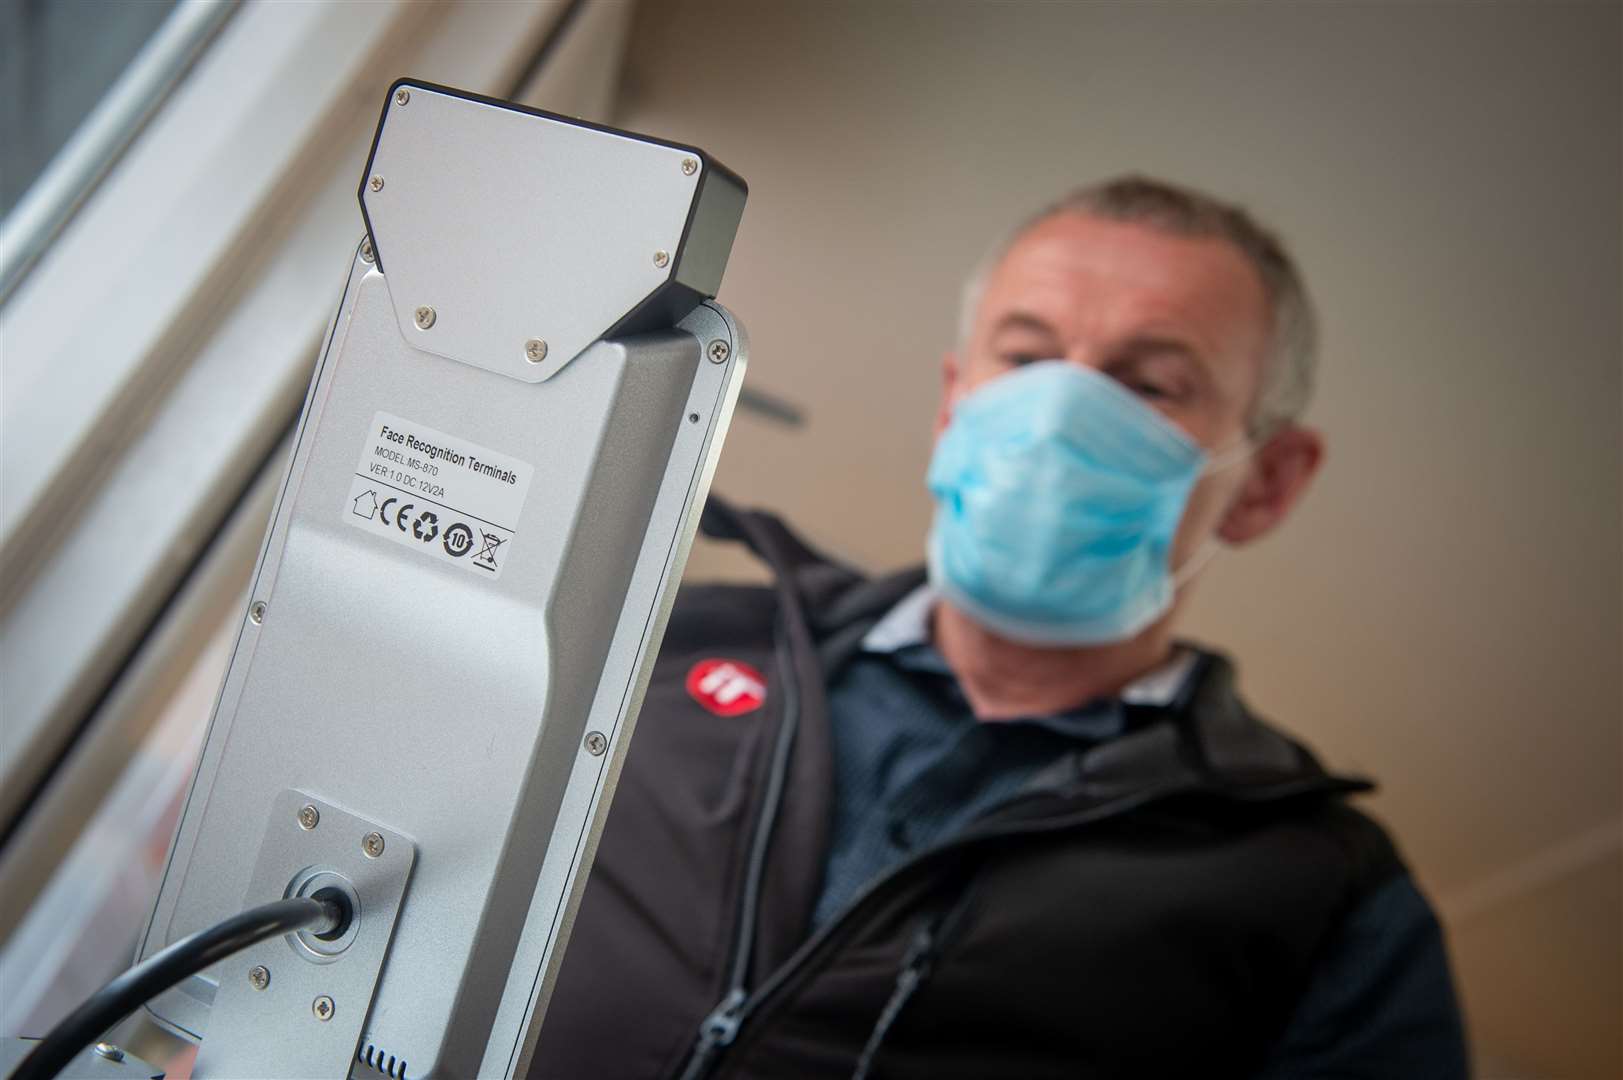 A heat detection booth at the firm's office measures people's temperatures. Picture: Callum Mackay.